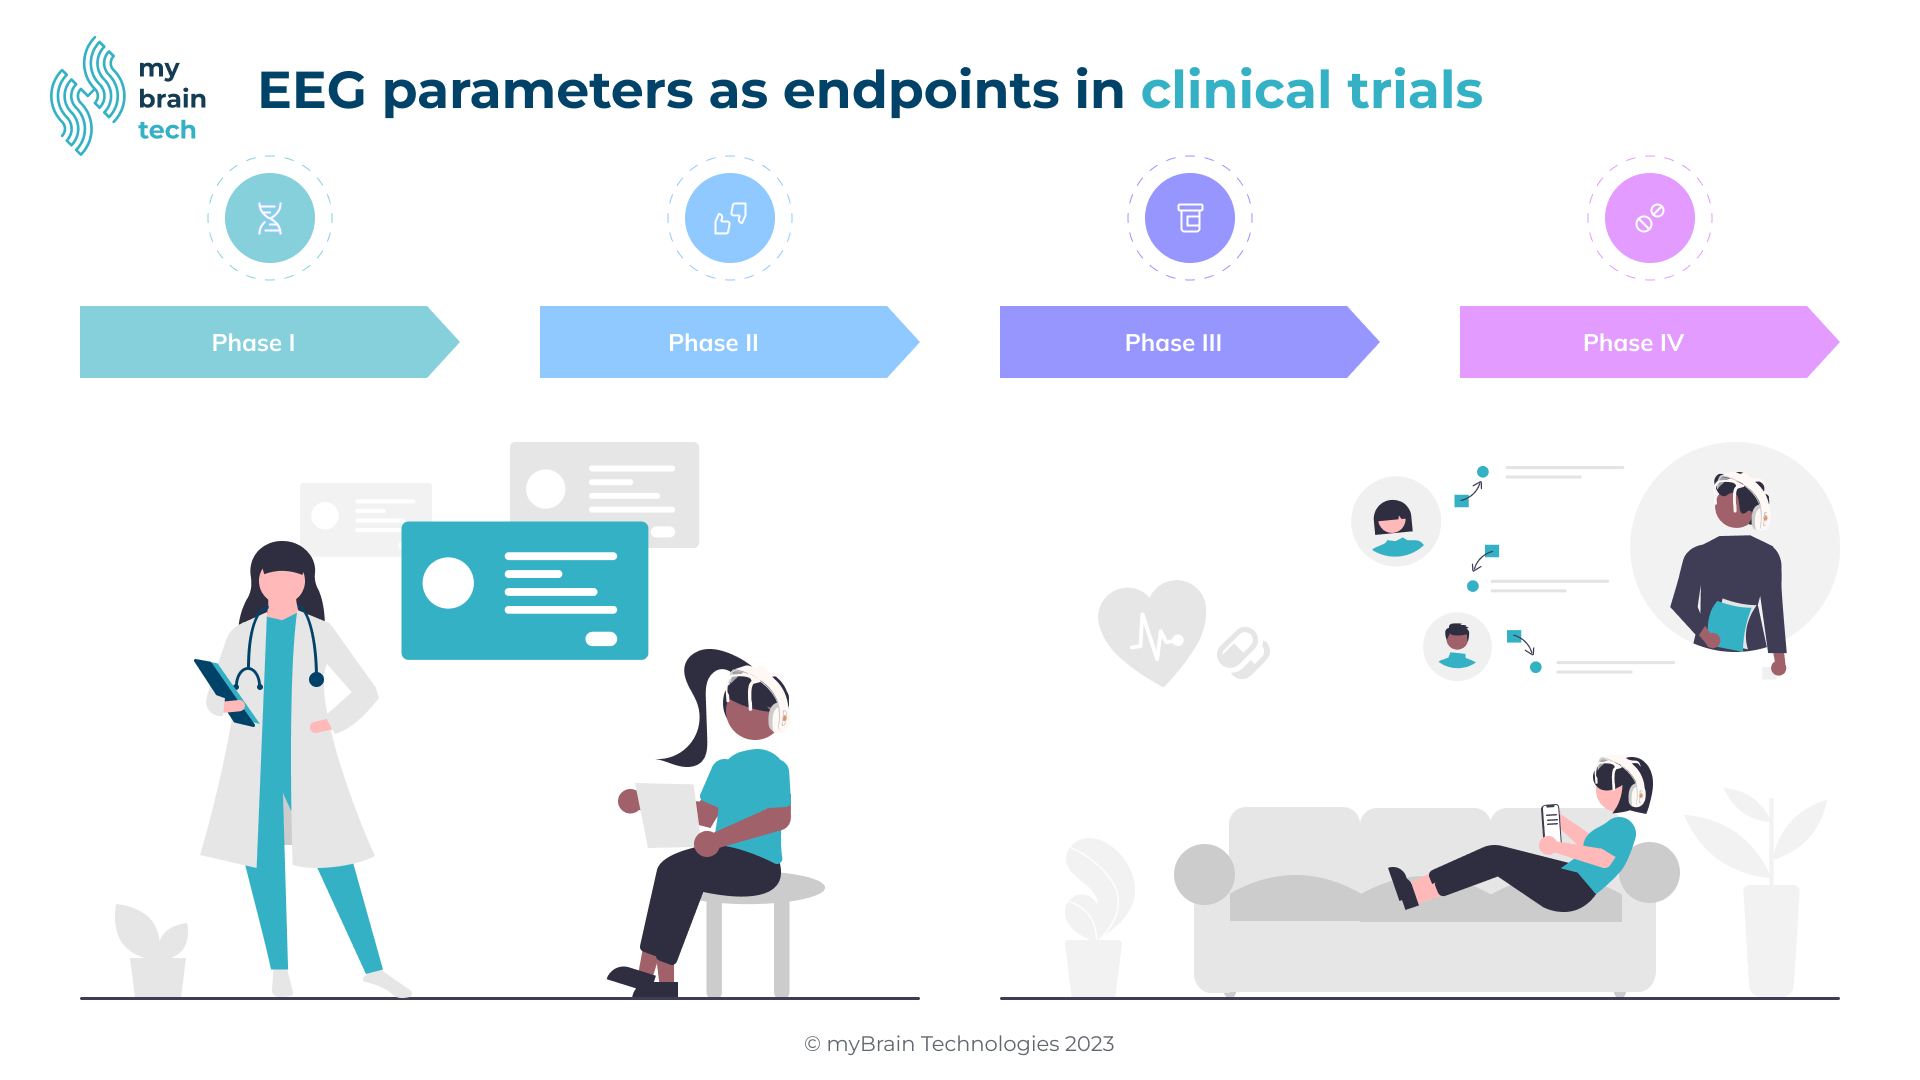 EEG-paramaters-as-endpoints-in-clinical-trials